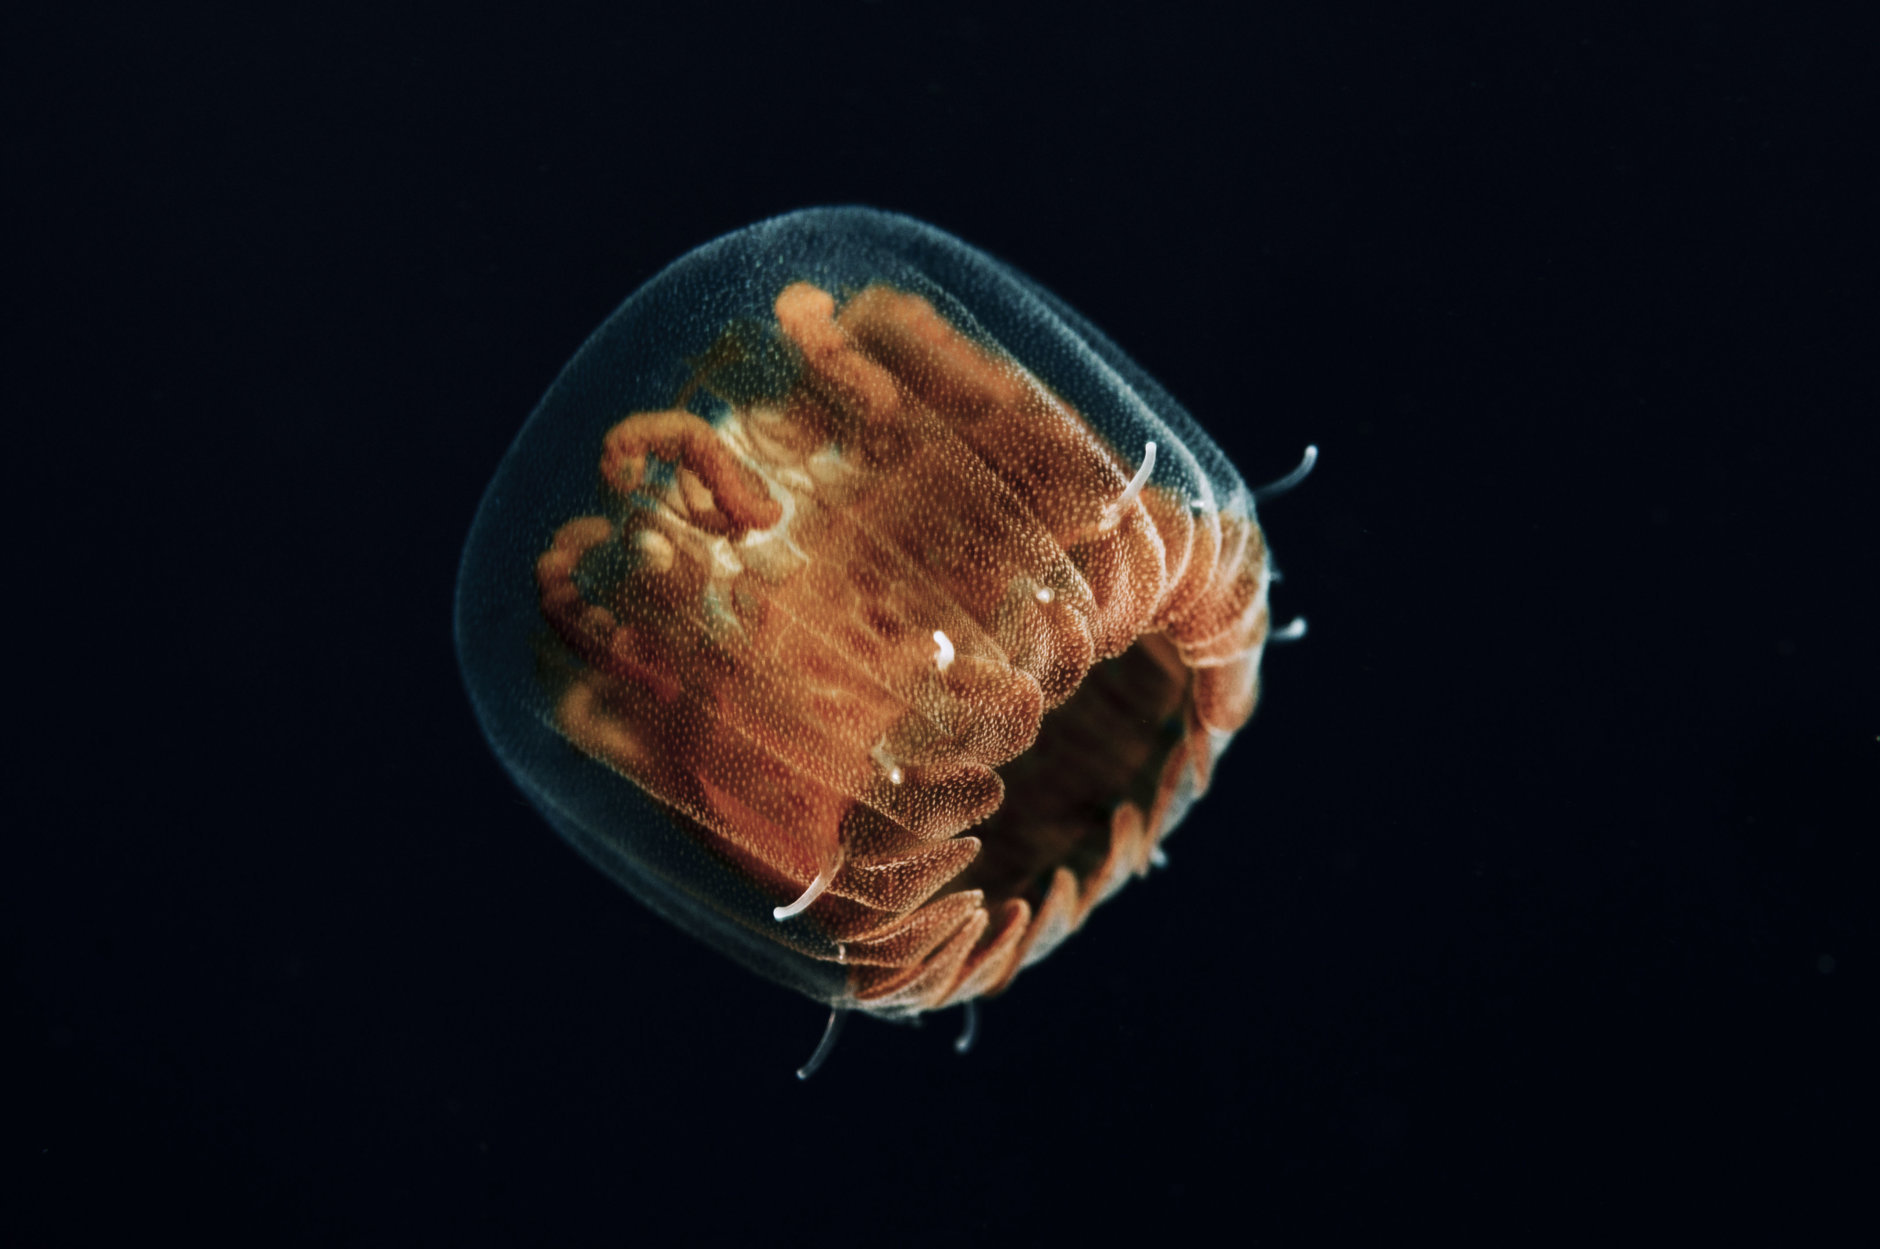 A sea thimble jellyfish, also known as a "sea louse," swims along the deep ocean. (Getty Images/iStockphoto/ShaneGross)